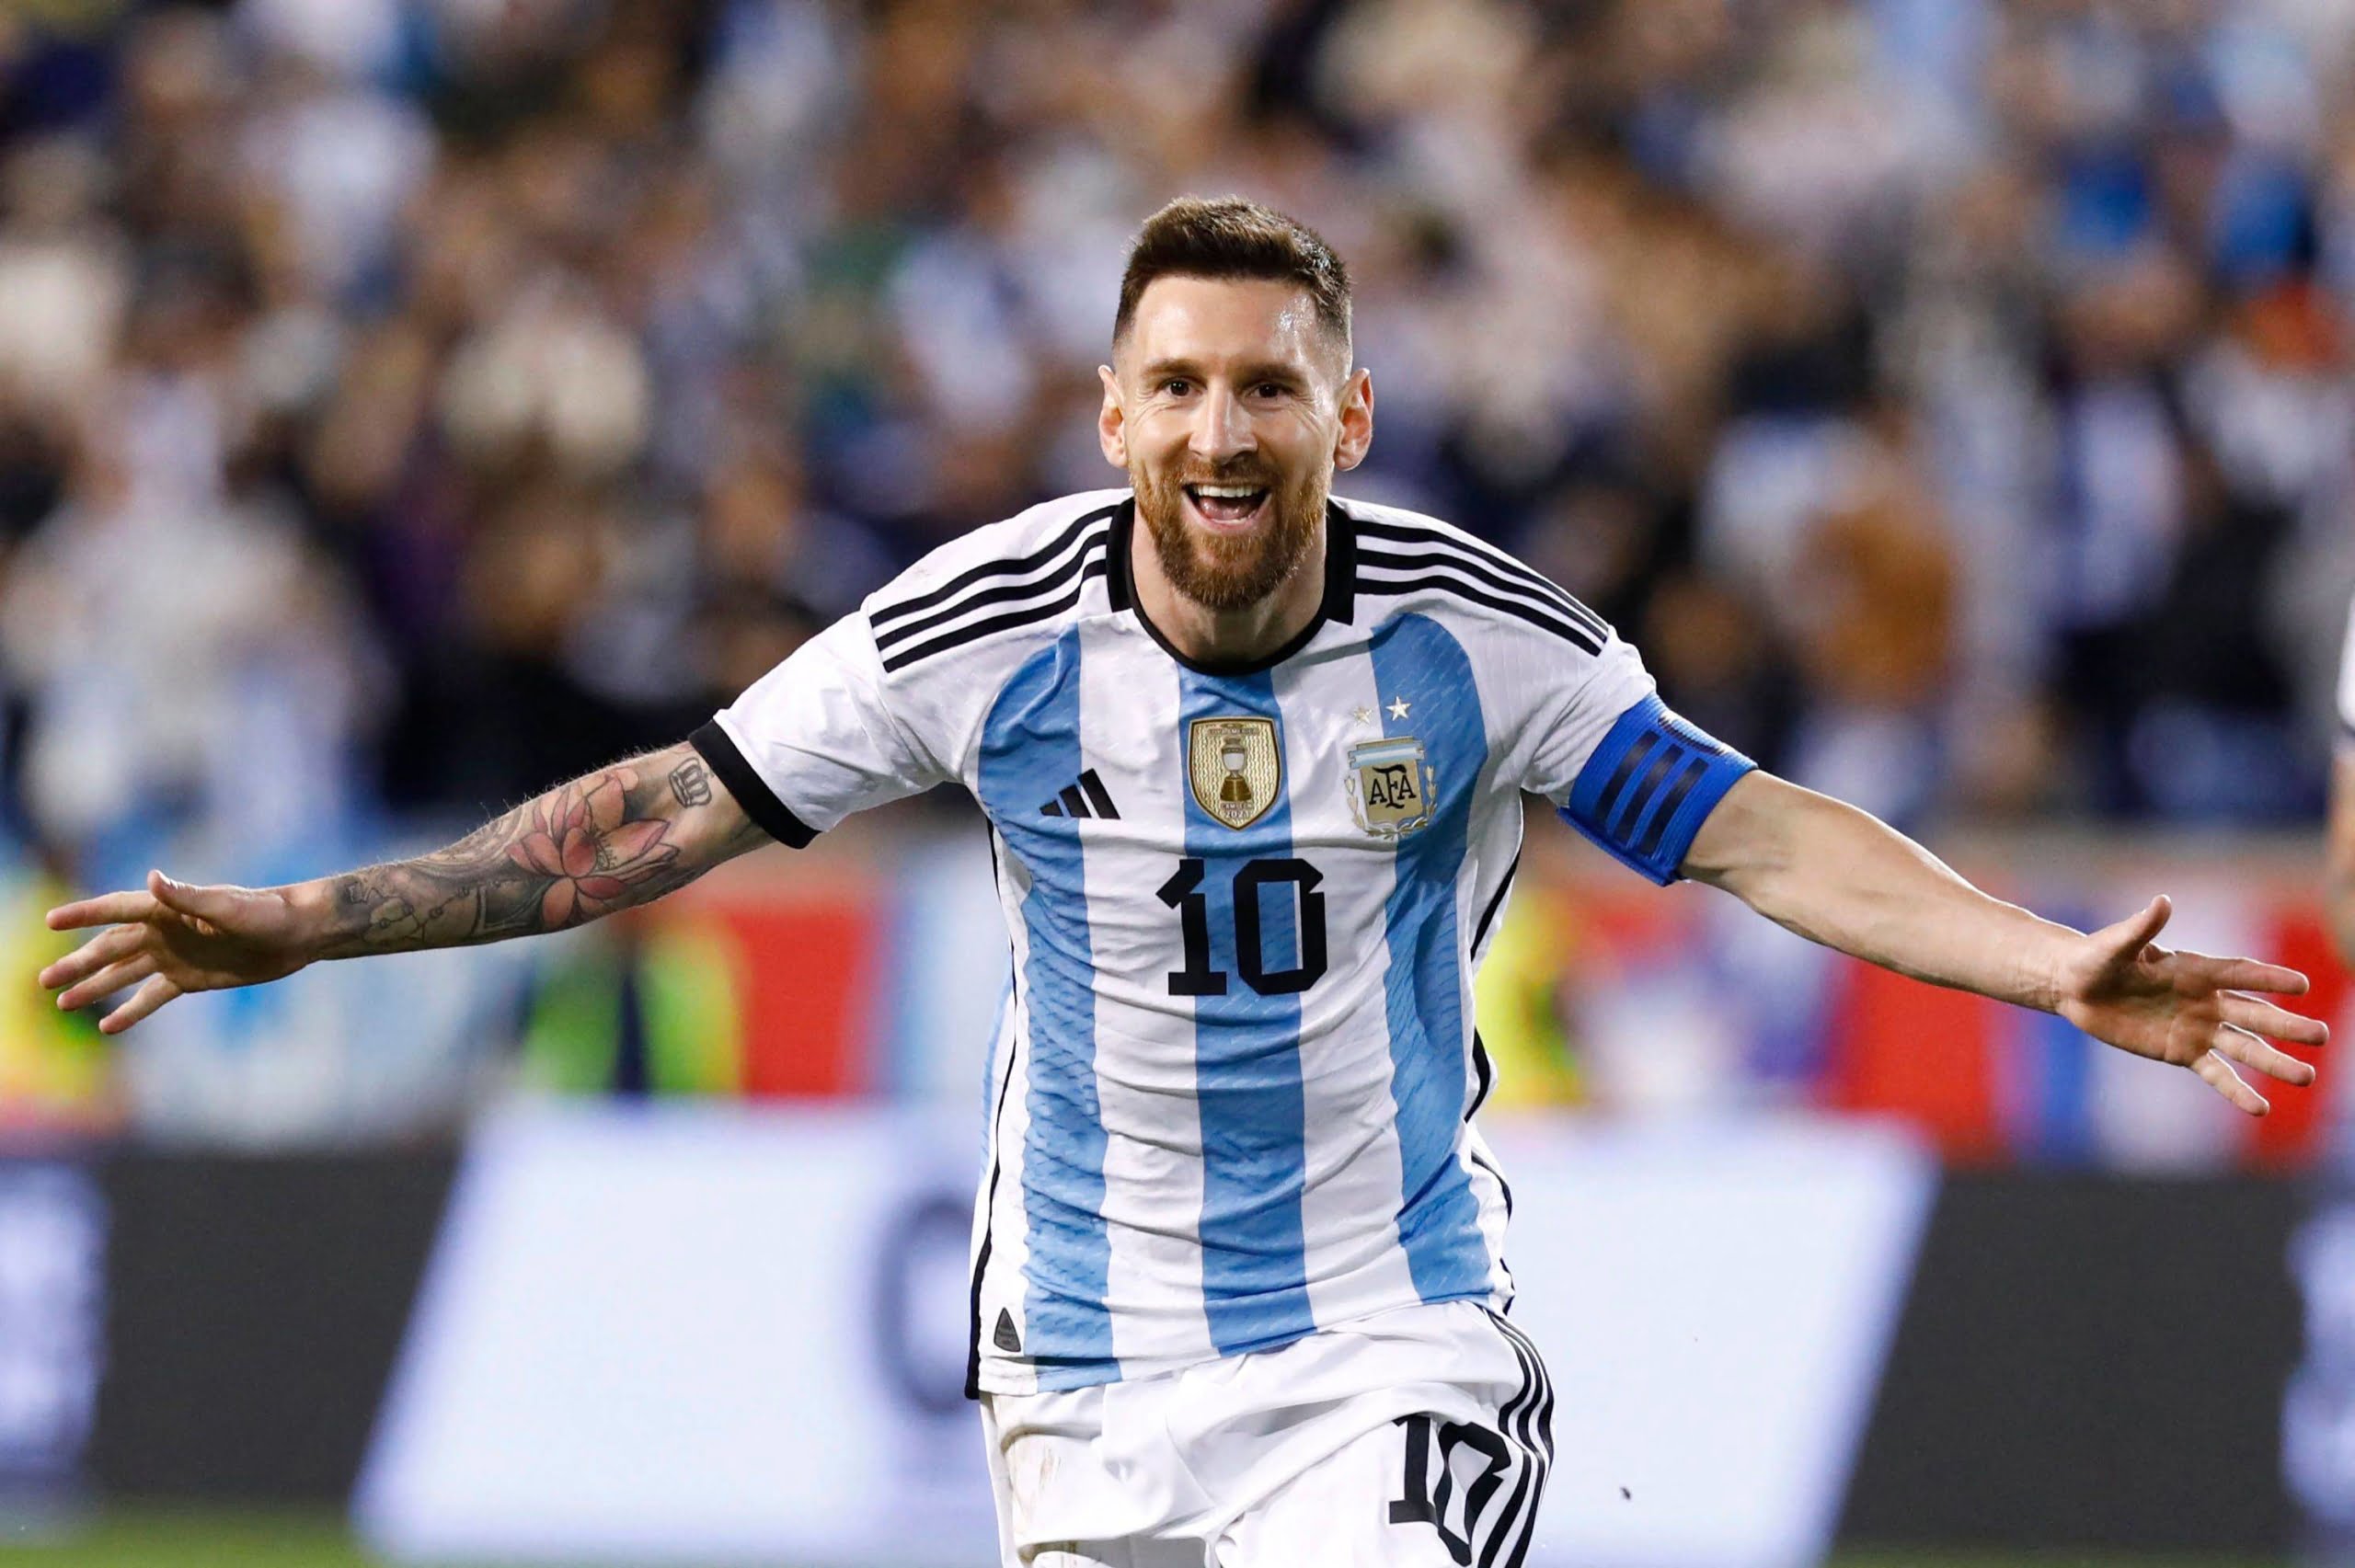 Know whether Lionel Messi will be able to fulfill his dream this time